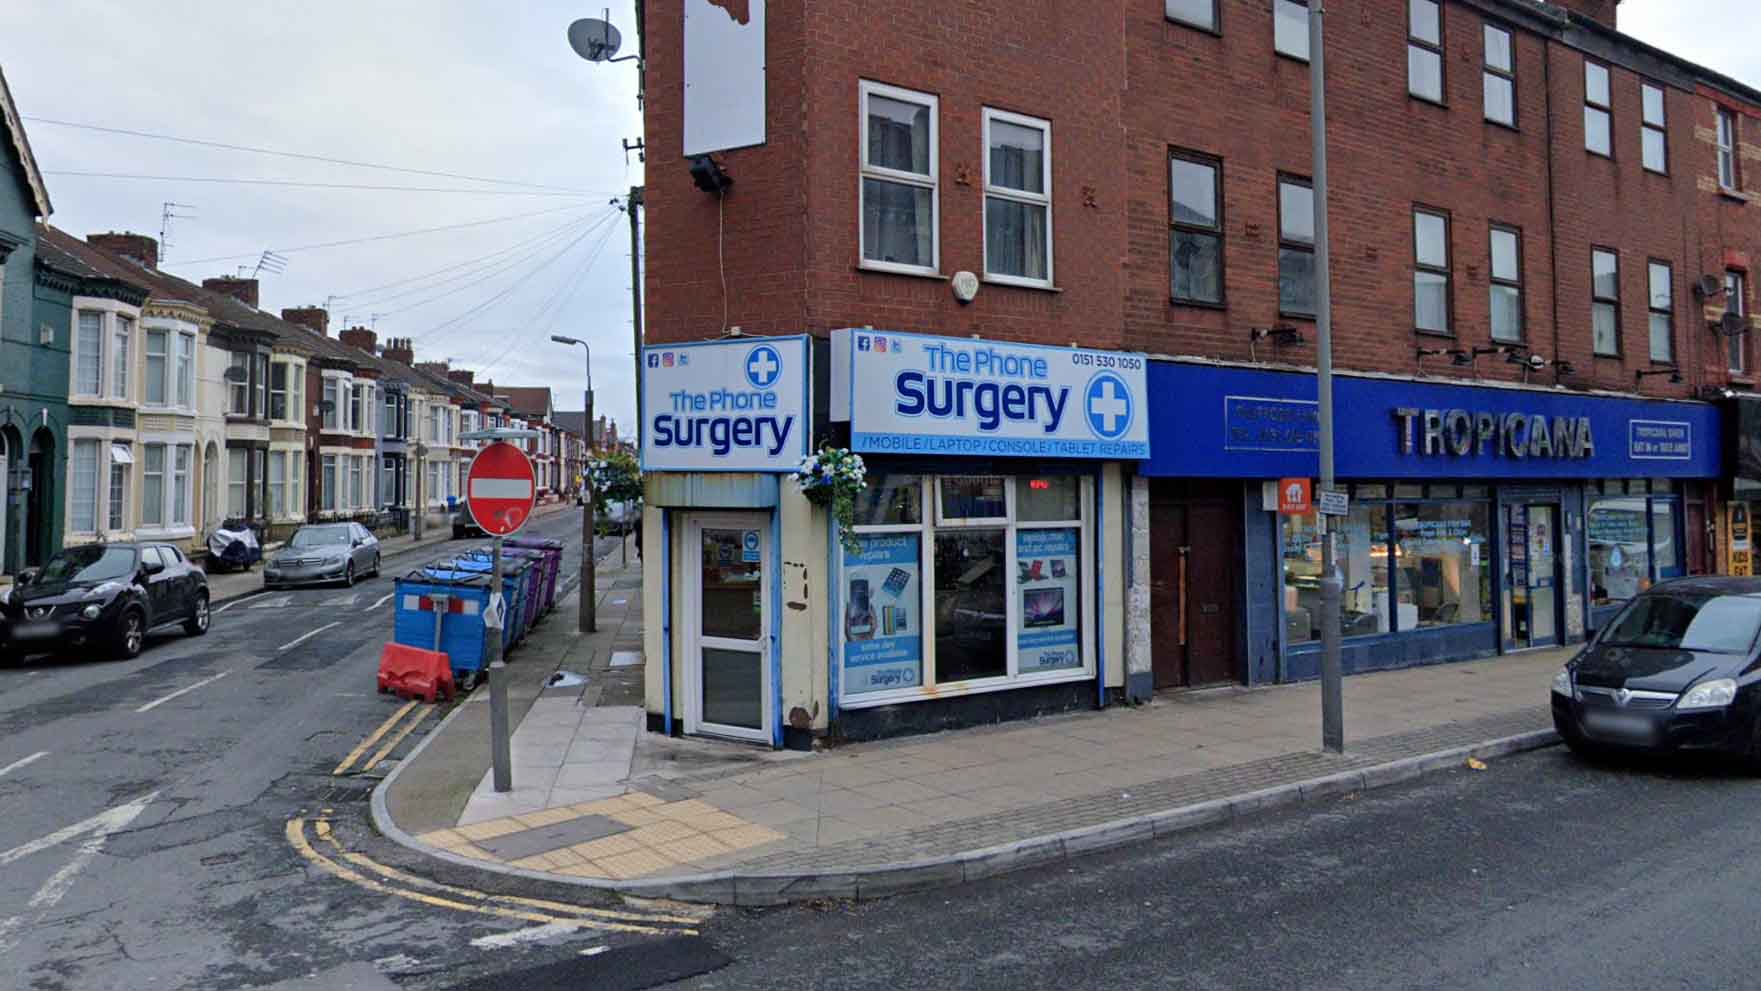 The Phone Surgery in Liverpool